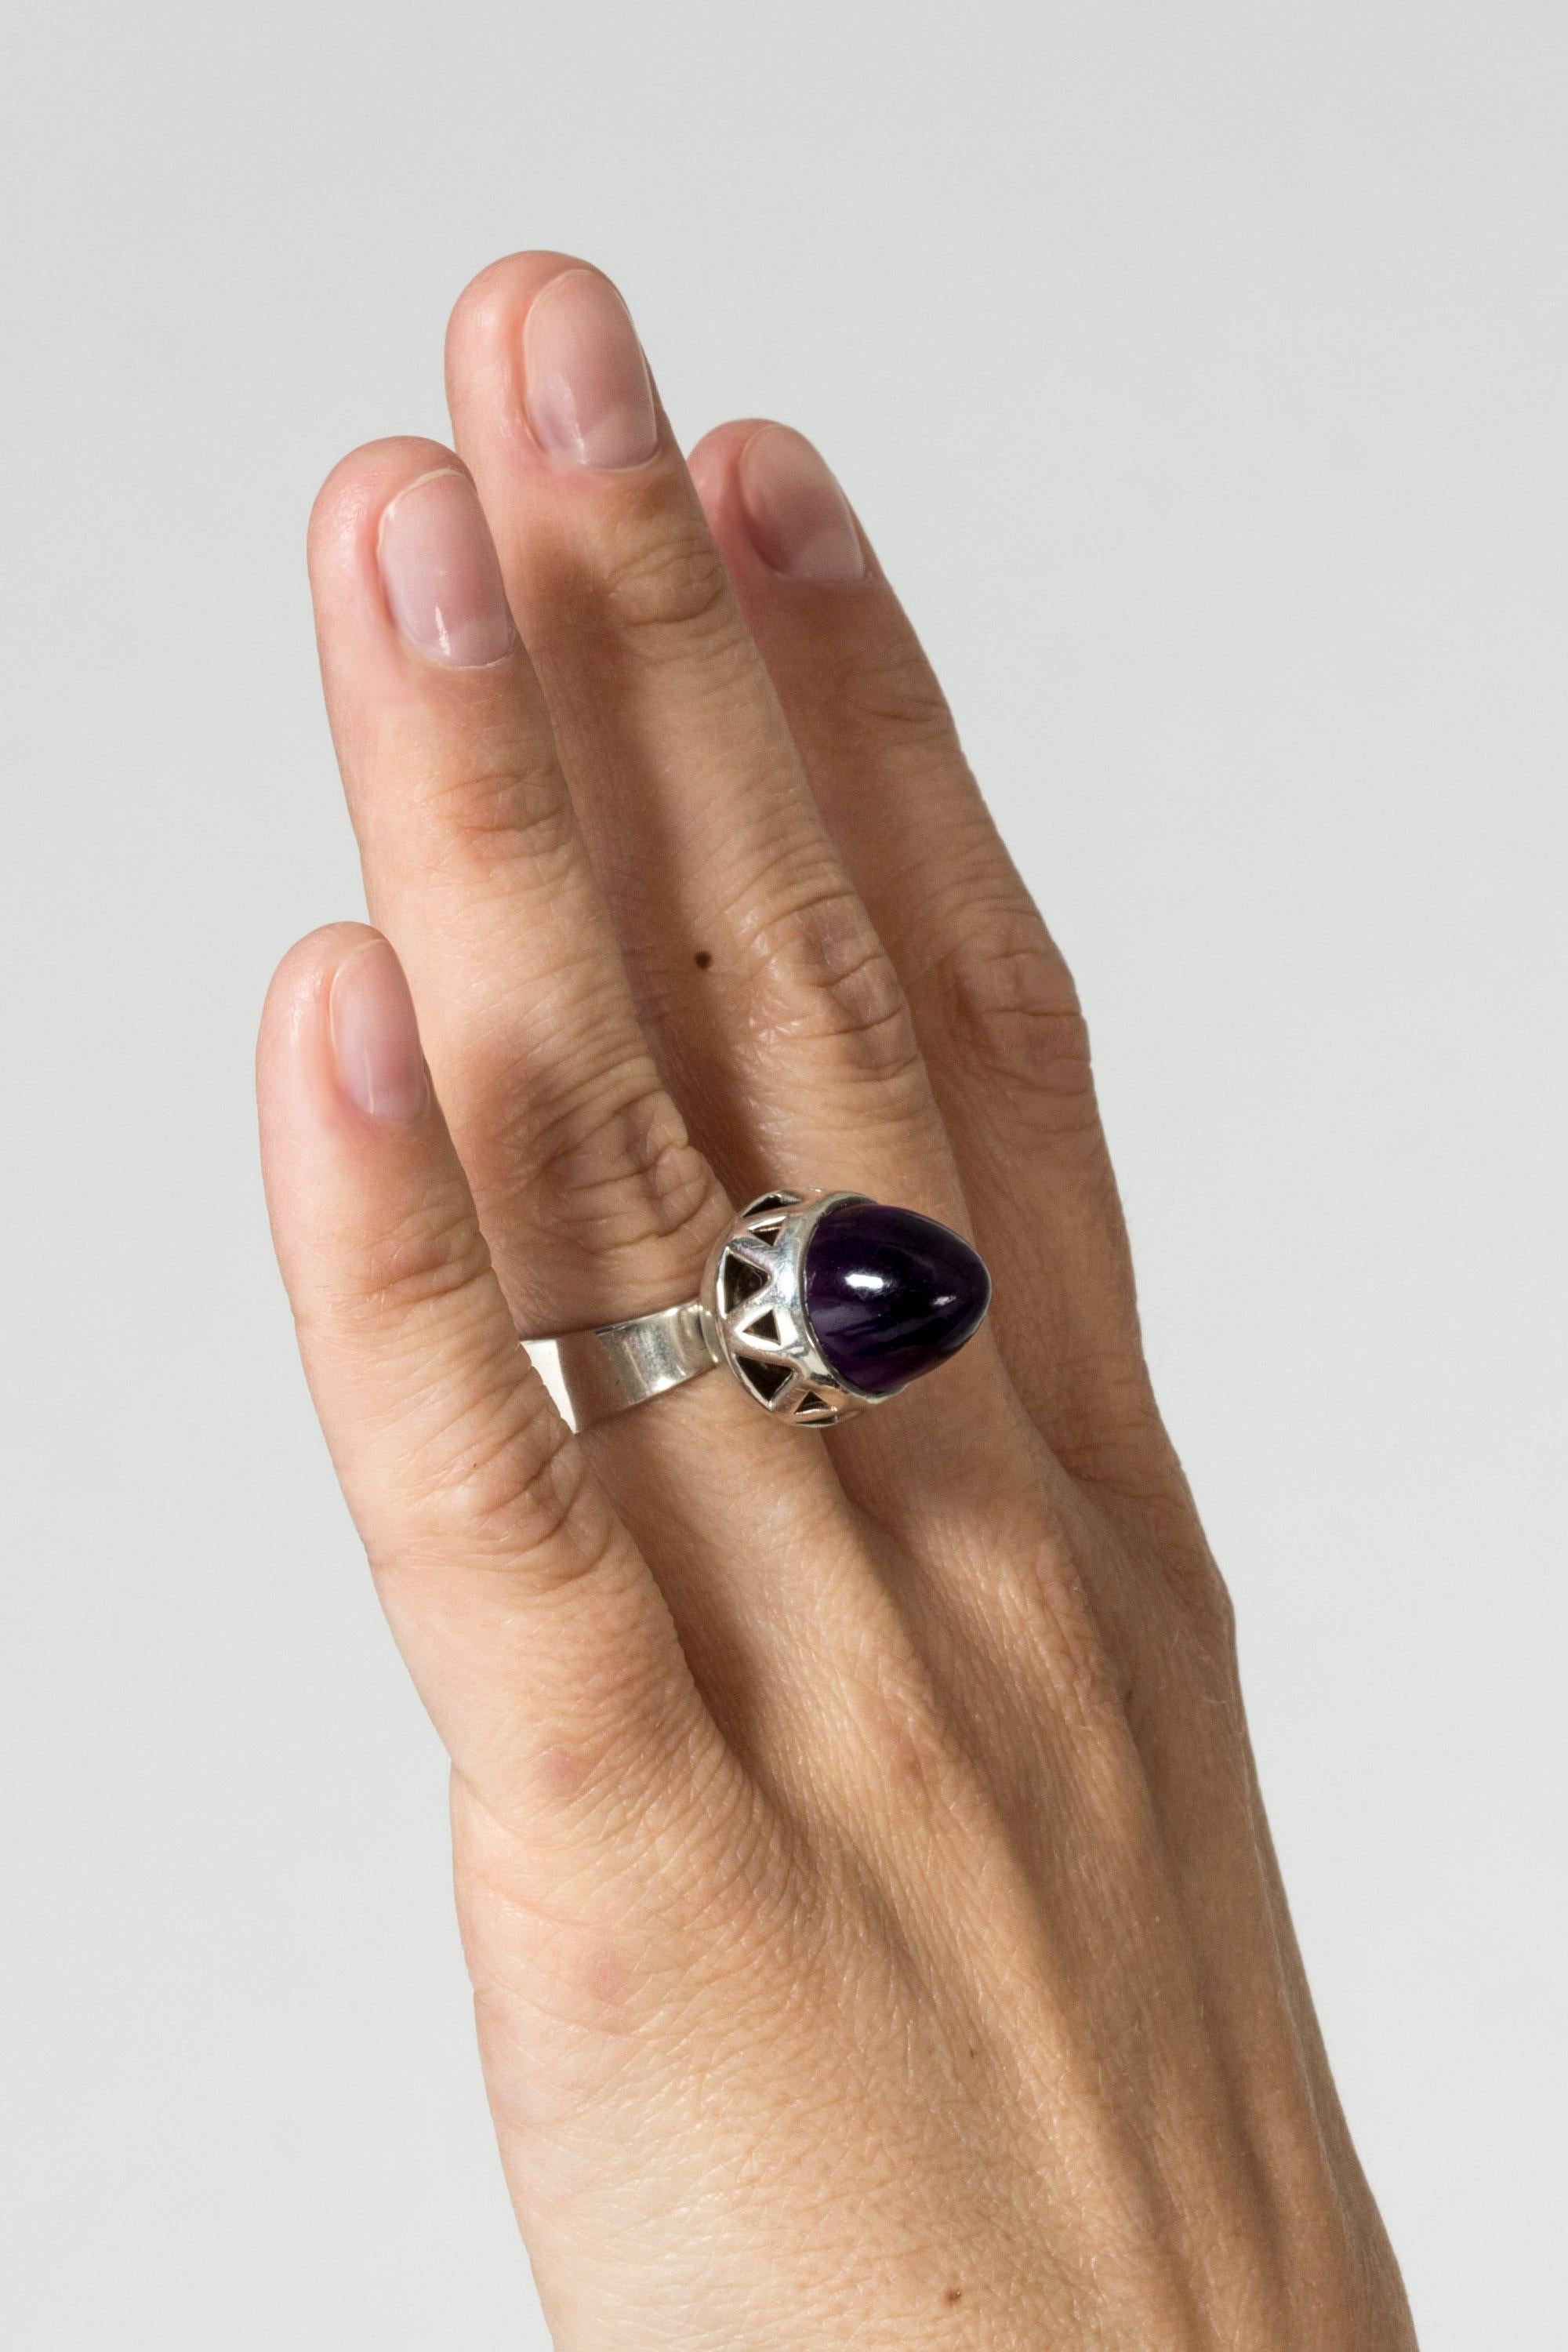 Very cool silver ring from Bengt Hallberg, with a large, pointy amethyst stone. Cutout setting that lets light in from under the stone and gives it an inner glow.